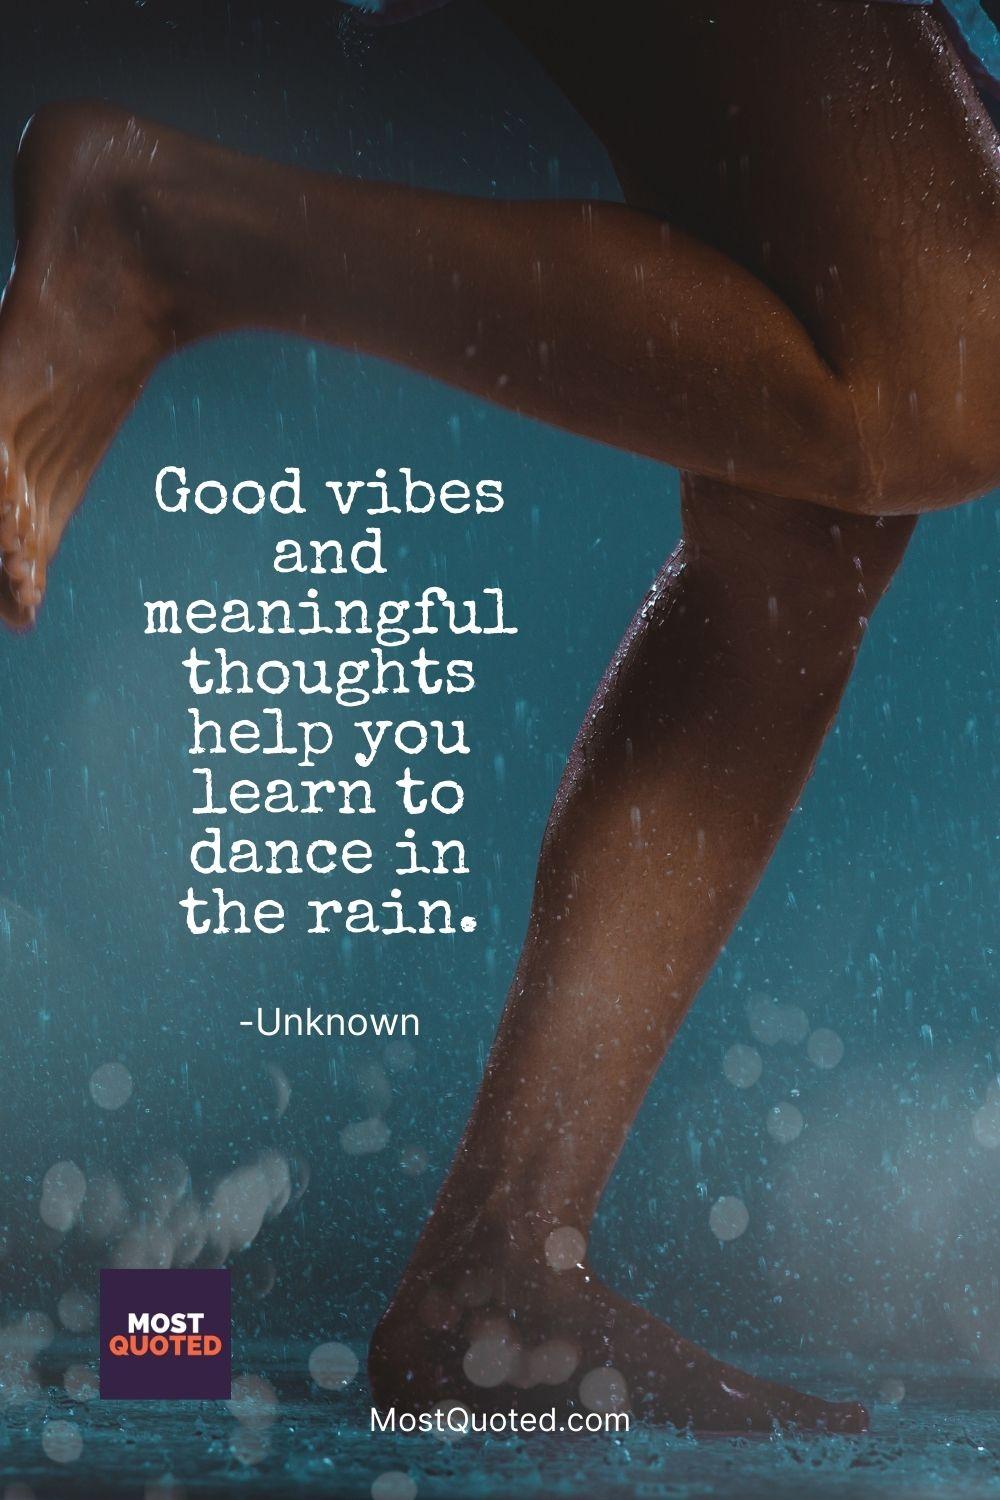 Good vibes and meaningful thoughts help you learn to dance in the rain.